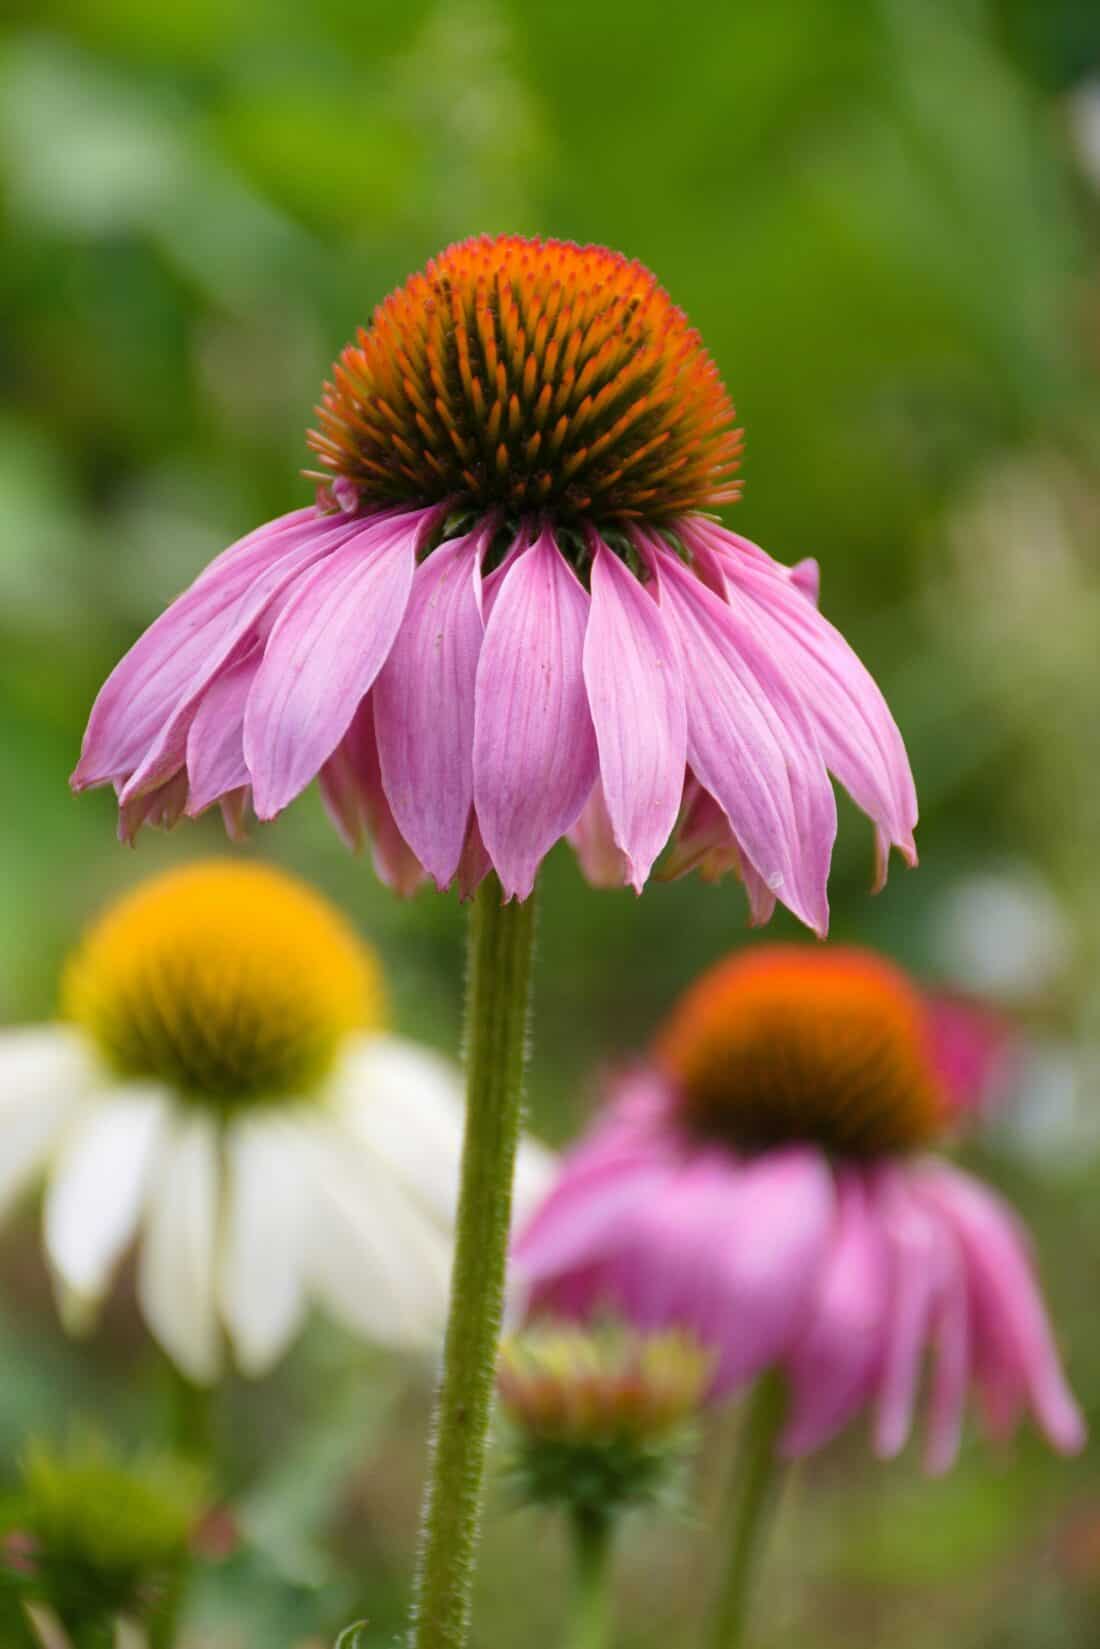 Close-up of a blooming purple coneflower with pink petals and an orange, spiky central cone standing tall in a green garden. In the background are more purple coneflowers, one of which has white petals and a yellow central cone, slightly blurred—a perfect study for planning a garden design.